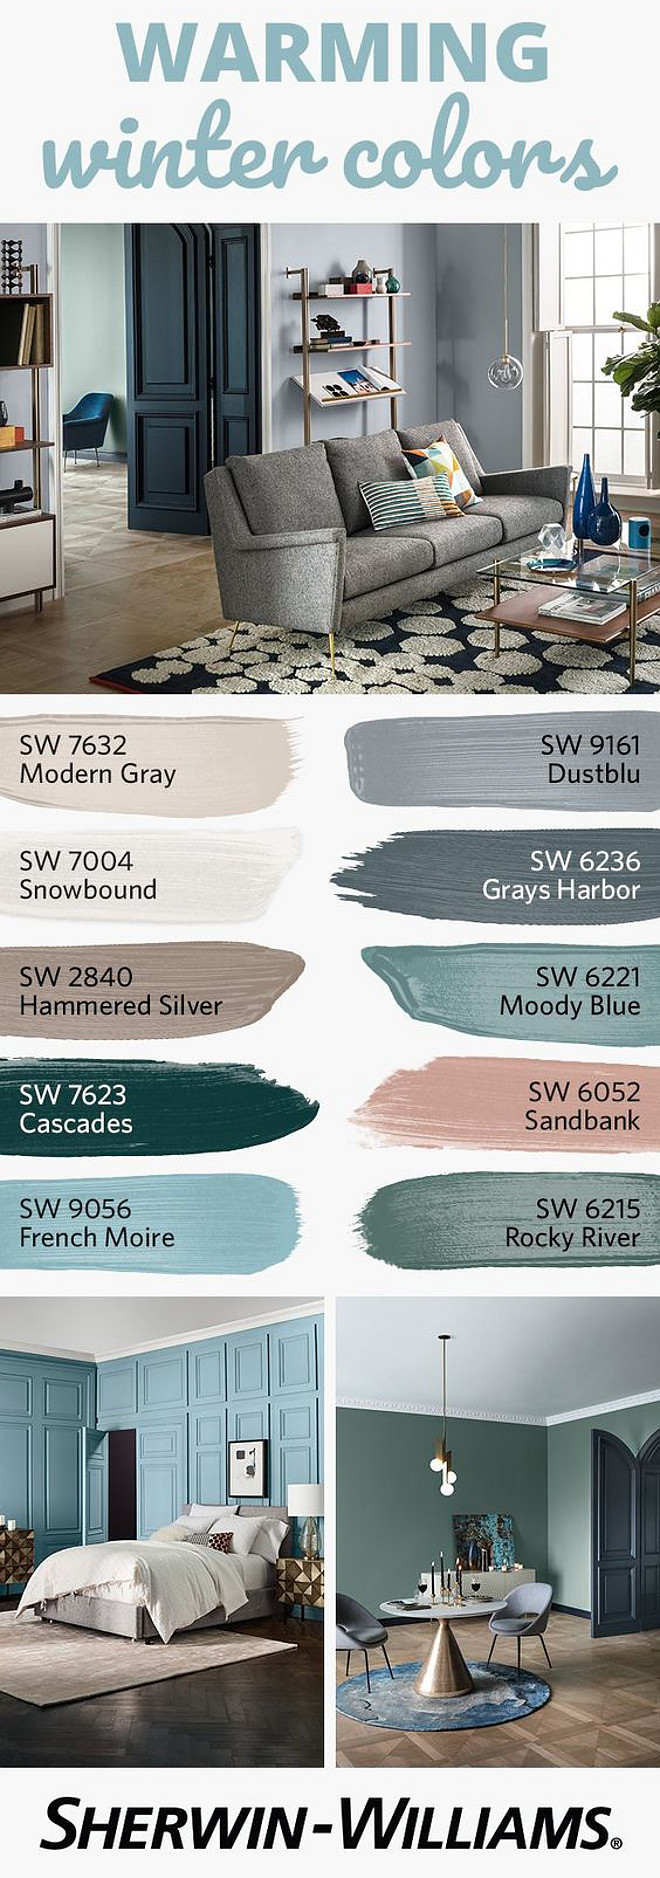 Warming Winter Paint Colors Warming Winter Paint Colors Sherwin Williams SW 7632 Modern Gray Sherwin Williams SW 9161 Dustblu Sherwin Williams SW 7004 Snowbound Sherwin Williams SW 6236 Grays Harbor Sherwin Williams SW 2840 Hammered Silver Sherwin Williams SW 6221 Moody Blue Sherwin Williams SW 7623 Cascades Sherwin Williams SW 6052 Sandbank Sherwin Williams SW 9056 French Moire Sherwin Williams SW 6215 Rocky River